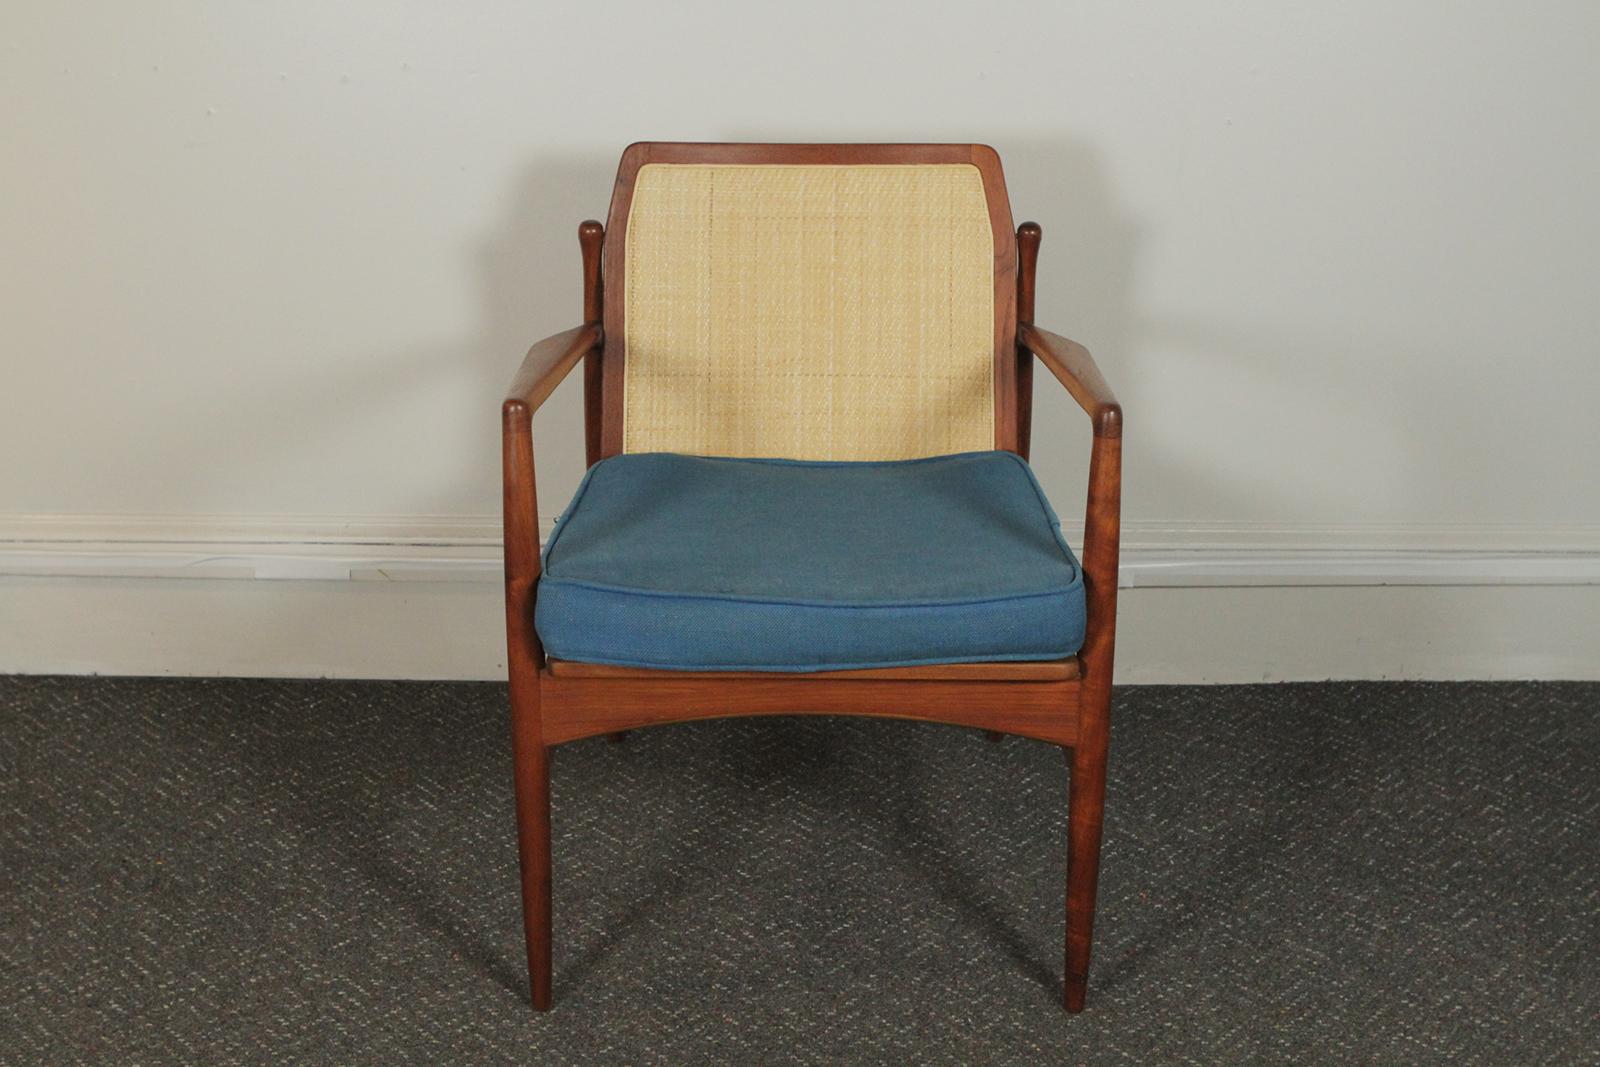 Ib Kofod-Larsen for Selig cane back armchair with original seat cushion. 

Dimensions: 23” W x 24.5 D x 30